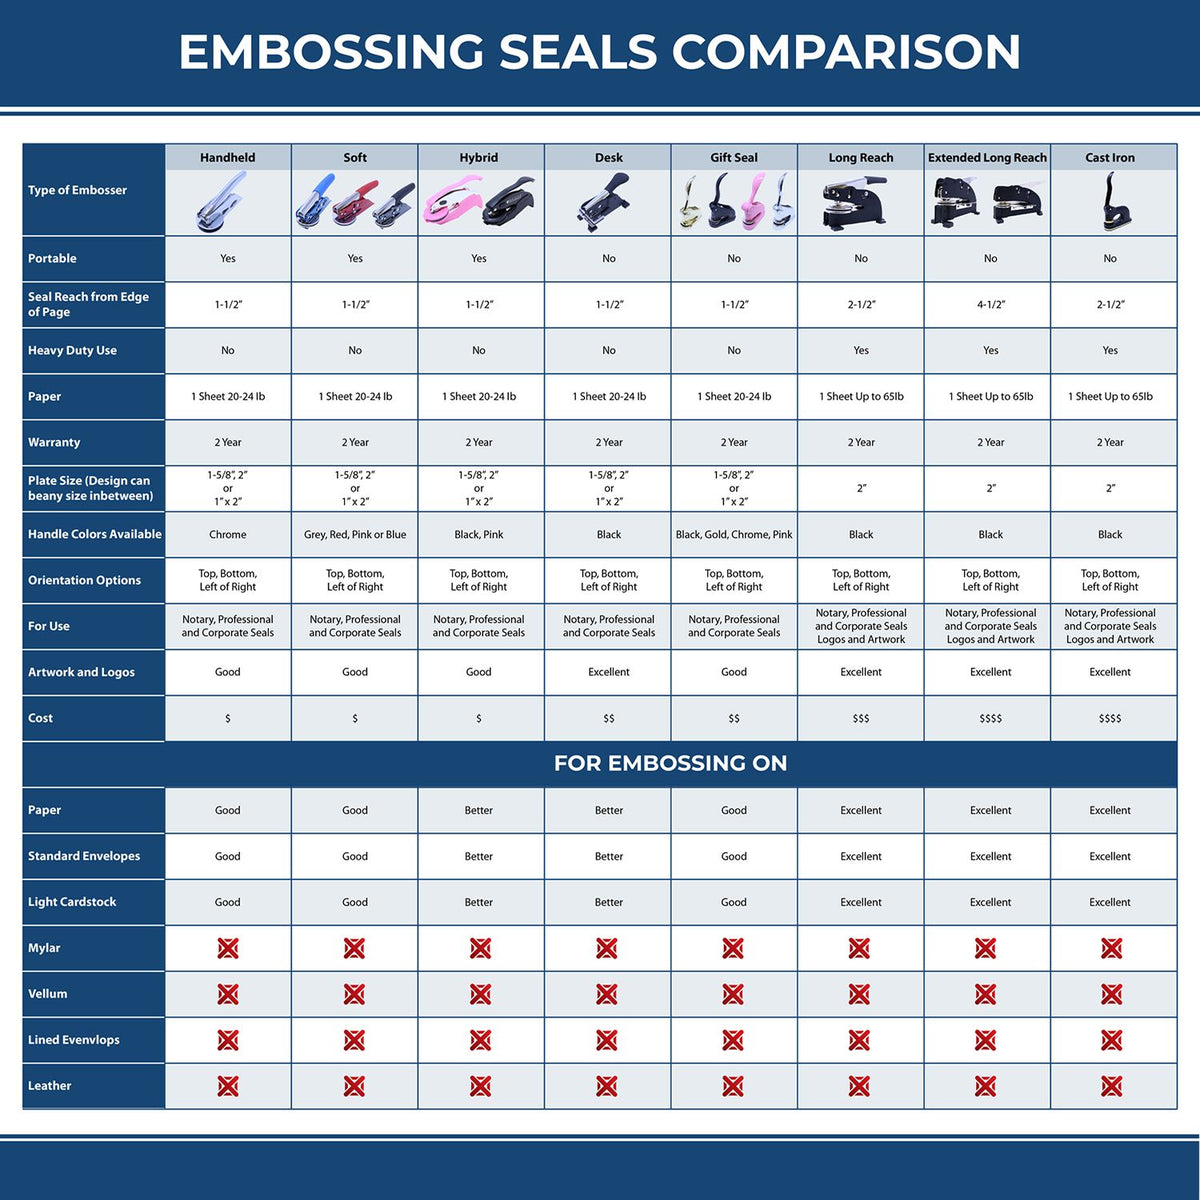 A comparison chart for the different types of mount models available for the State of Nebraska Long Reach Architectural Embossing Seal.